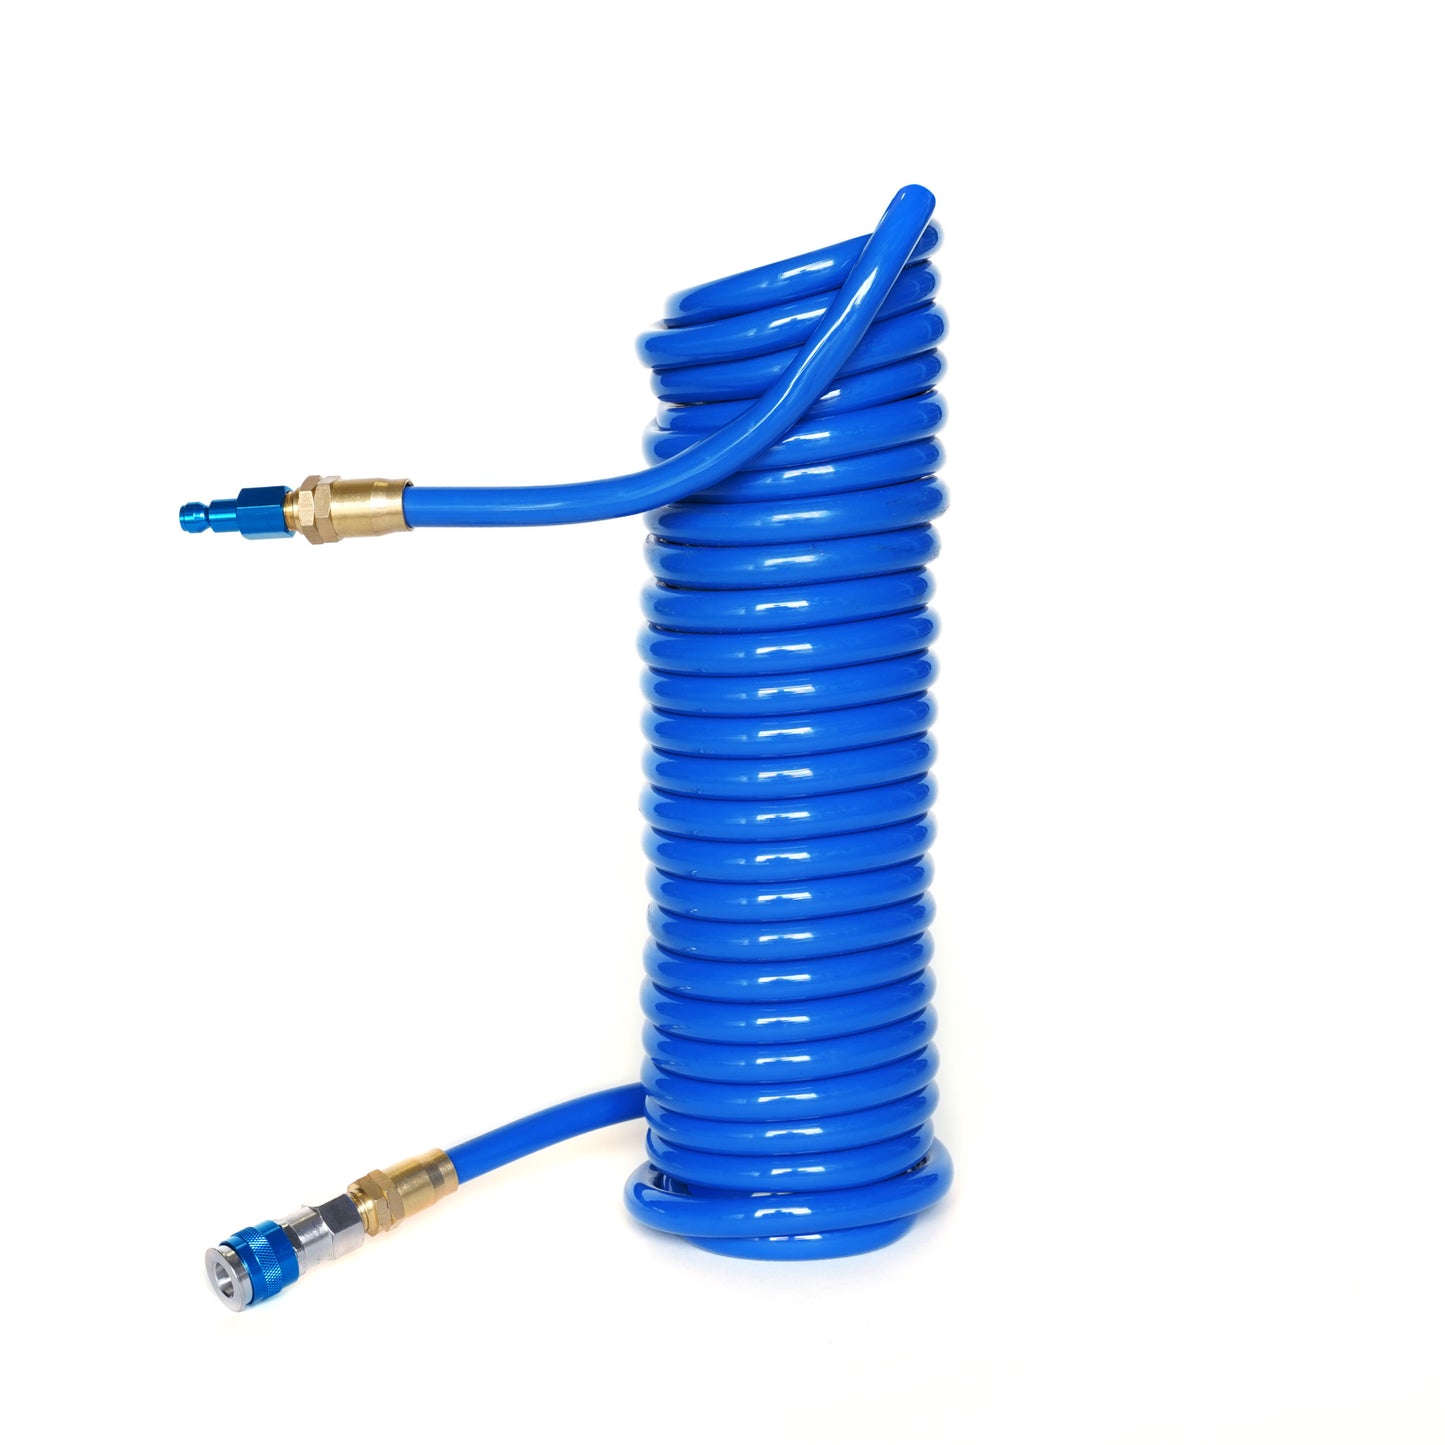 25-Foot Coiled 3/8-Inch ID Air Hose with Reuseable 1/4-Inch NPT Brass and Quick Connect Fittings